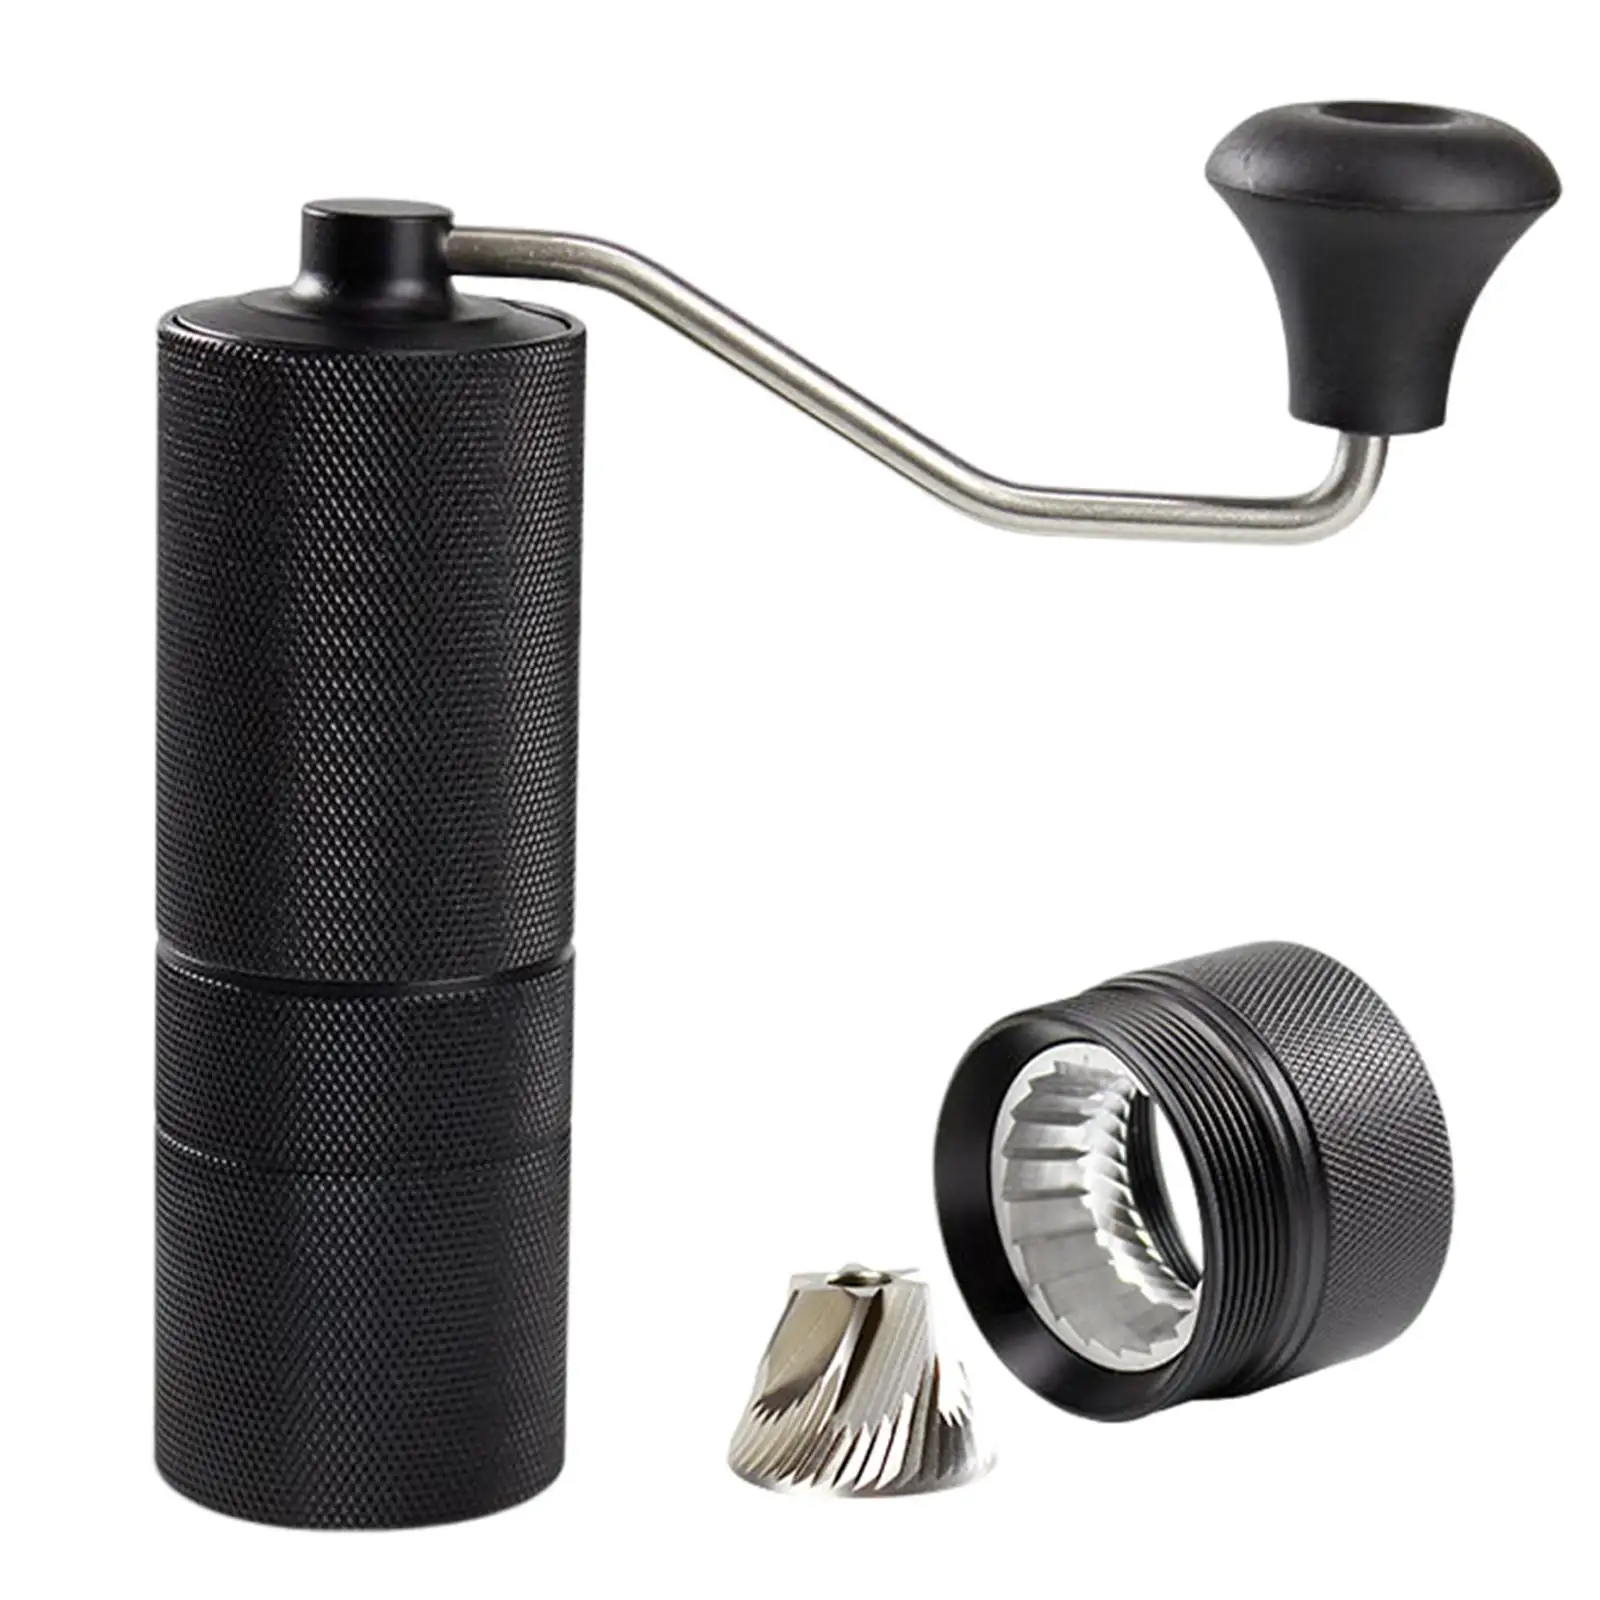 Handheld Manual Coffee Mill Hand Crank Coffee Mill with Adjustable Coarseness Settings for Cafe